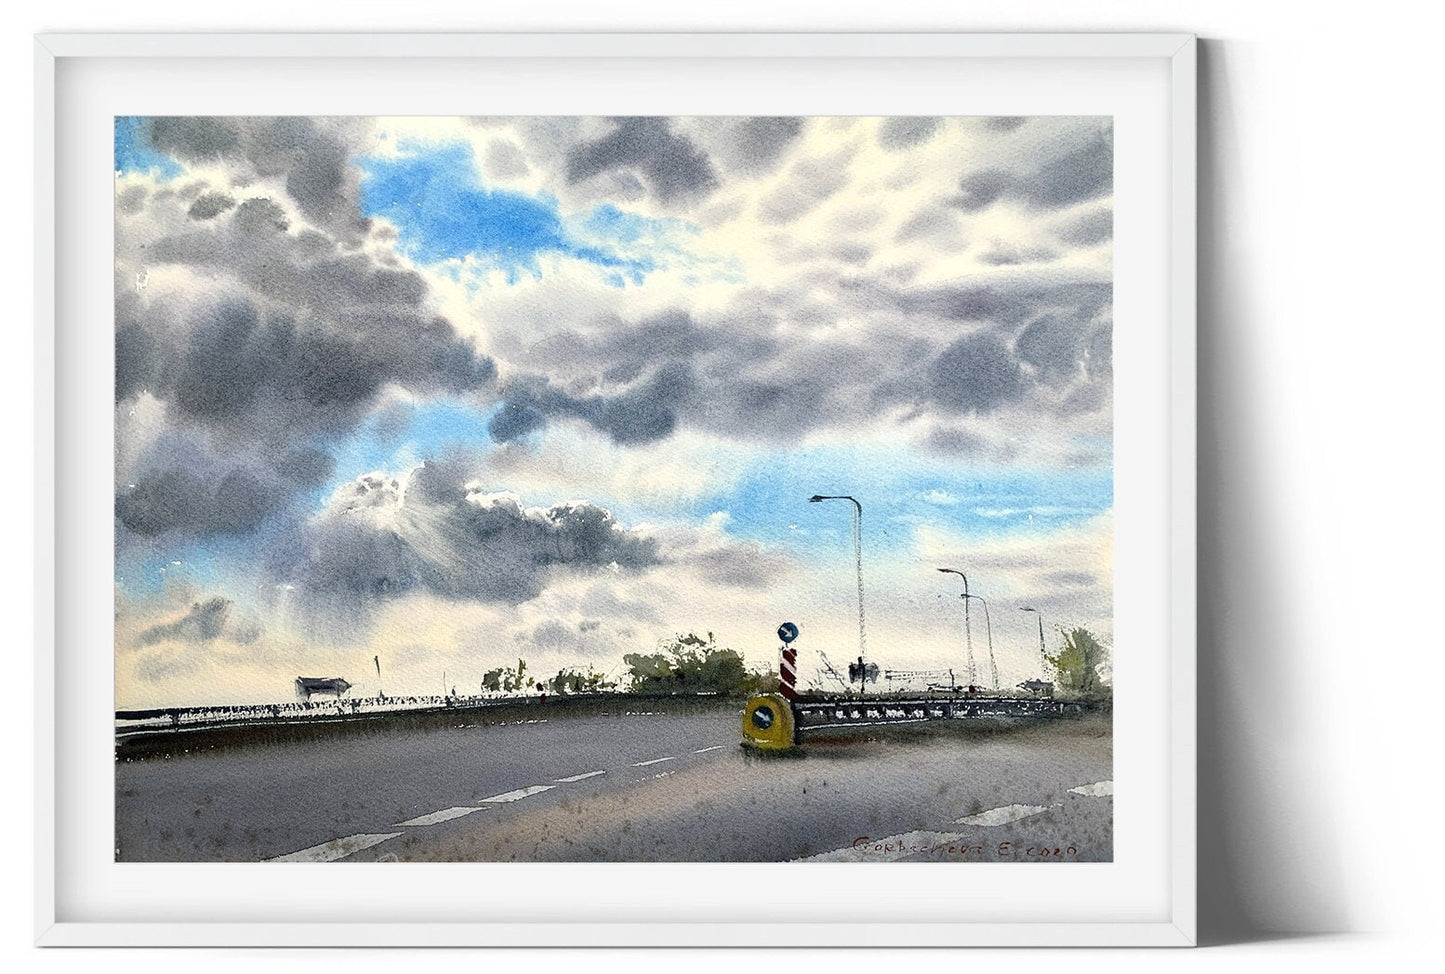 Landscape Original Watercolor Painting, Road Traffic, Summer Cloud Highway, Way Wall Decor, Colorful Impressionist Art